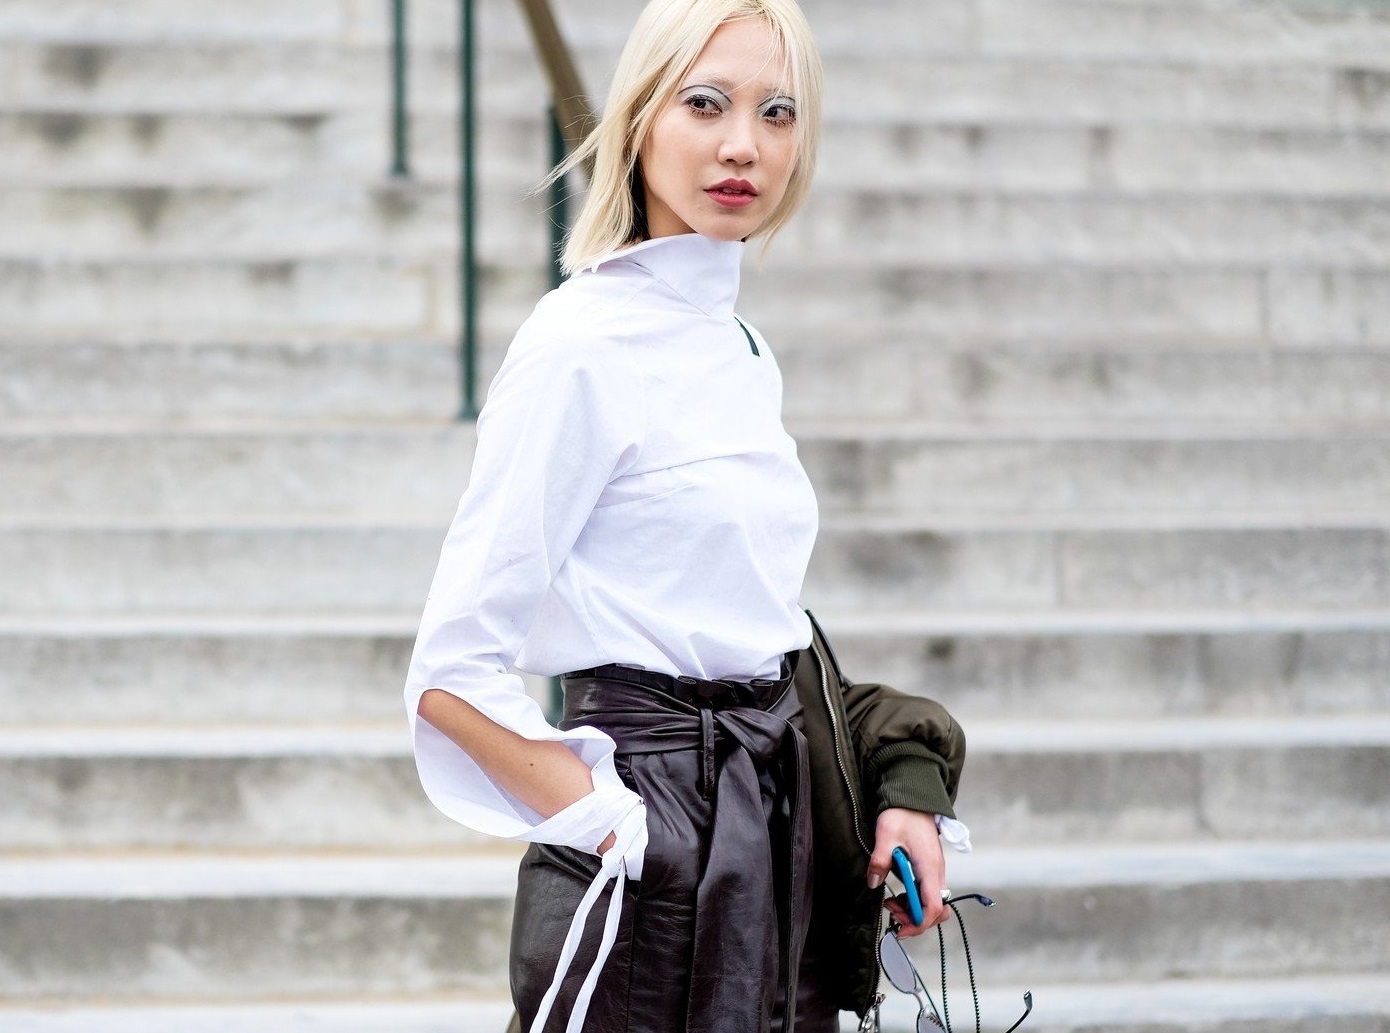 Street style, model Soo Joo after Chanel Fall-Winter 2017-2018 show held at Grand Palais, in Paris, France, on March 7th, 2017., Image: 324211595, License: Rights-managed, Restrictions: , Model Release: no, Credit line: Profimedia, Abaca